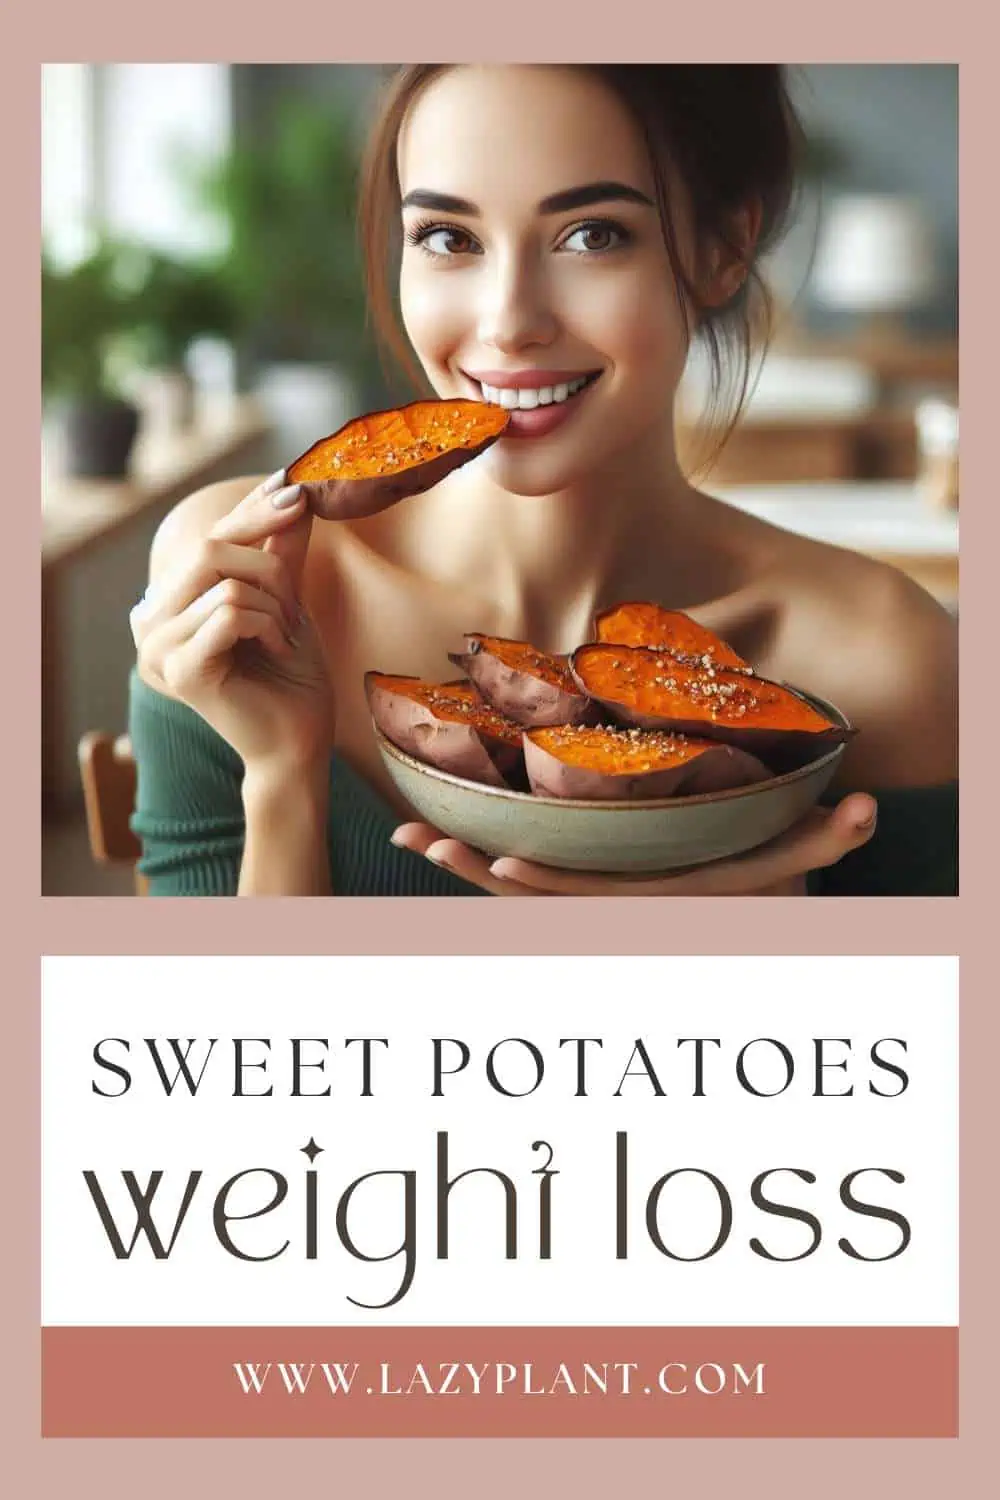 Sweet or white potatoes for Weight Loss?